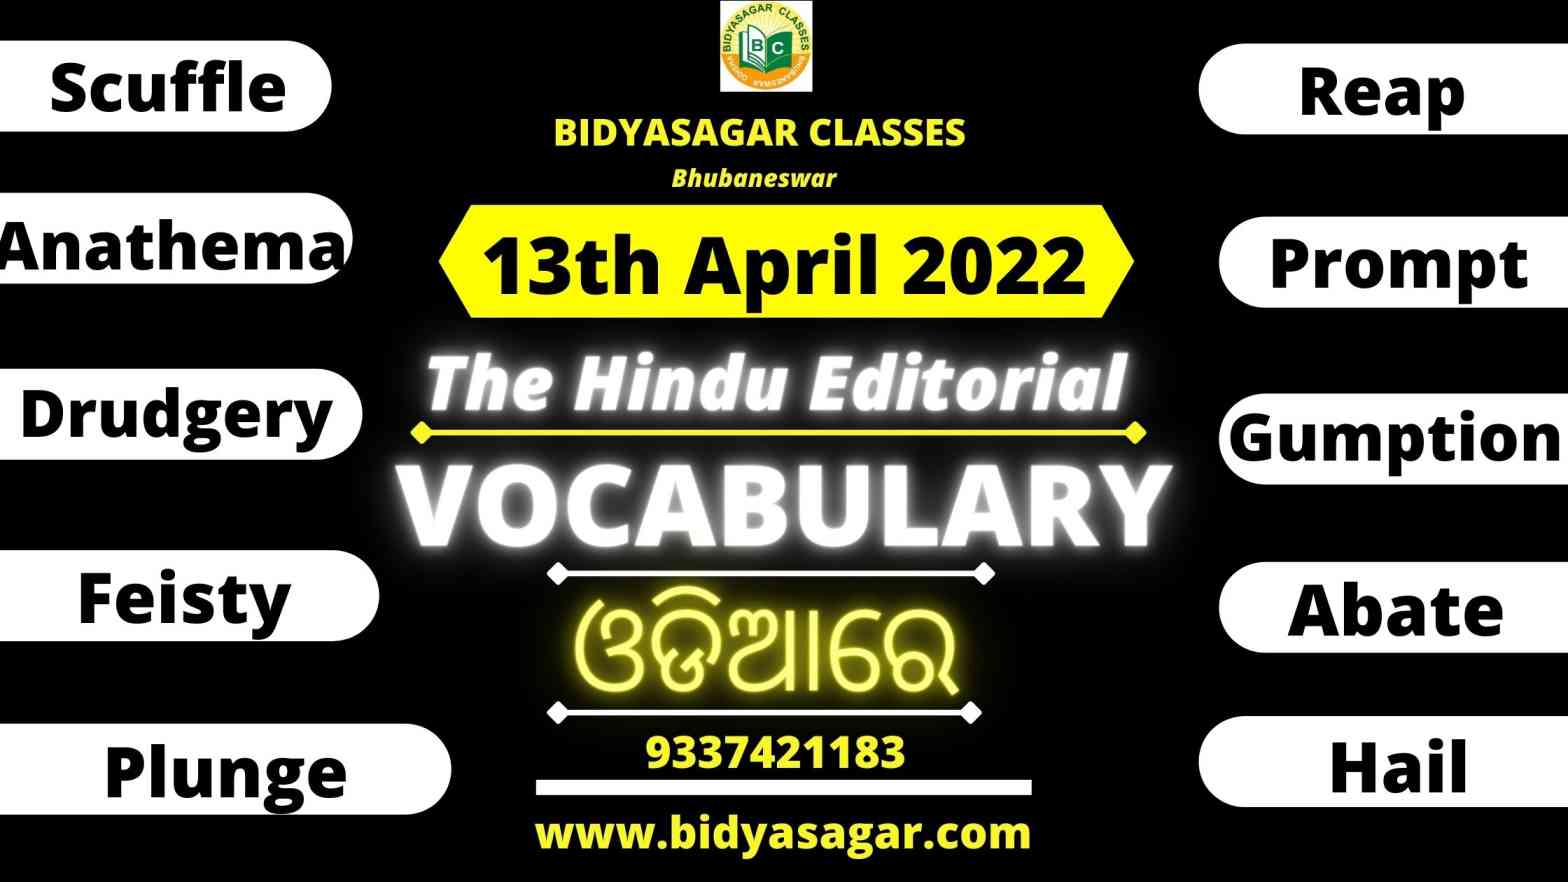 The Hindu Editorial Vocabulary of 13th April 2022